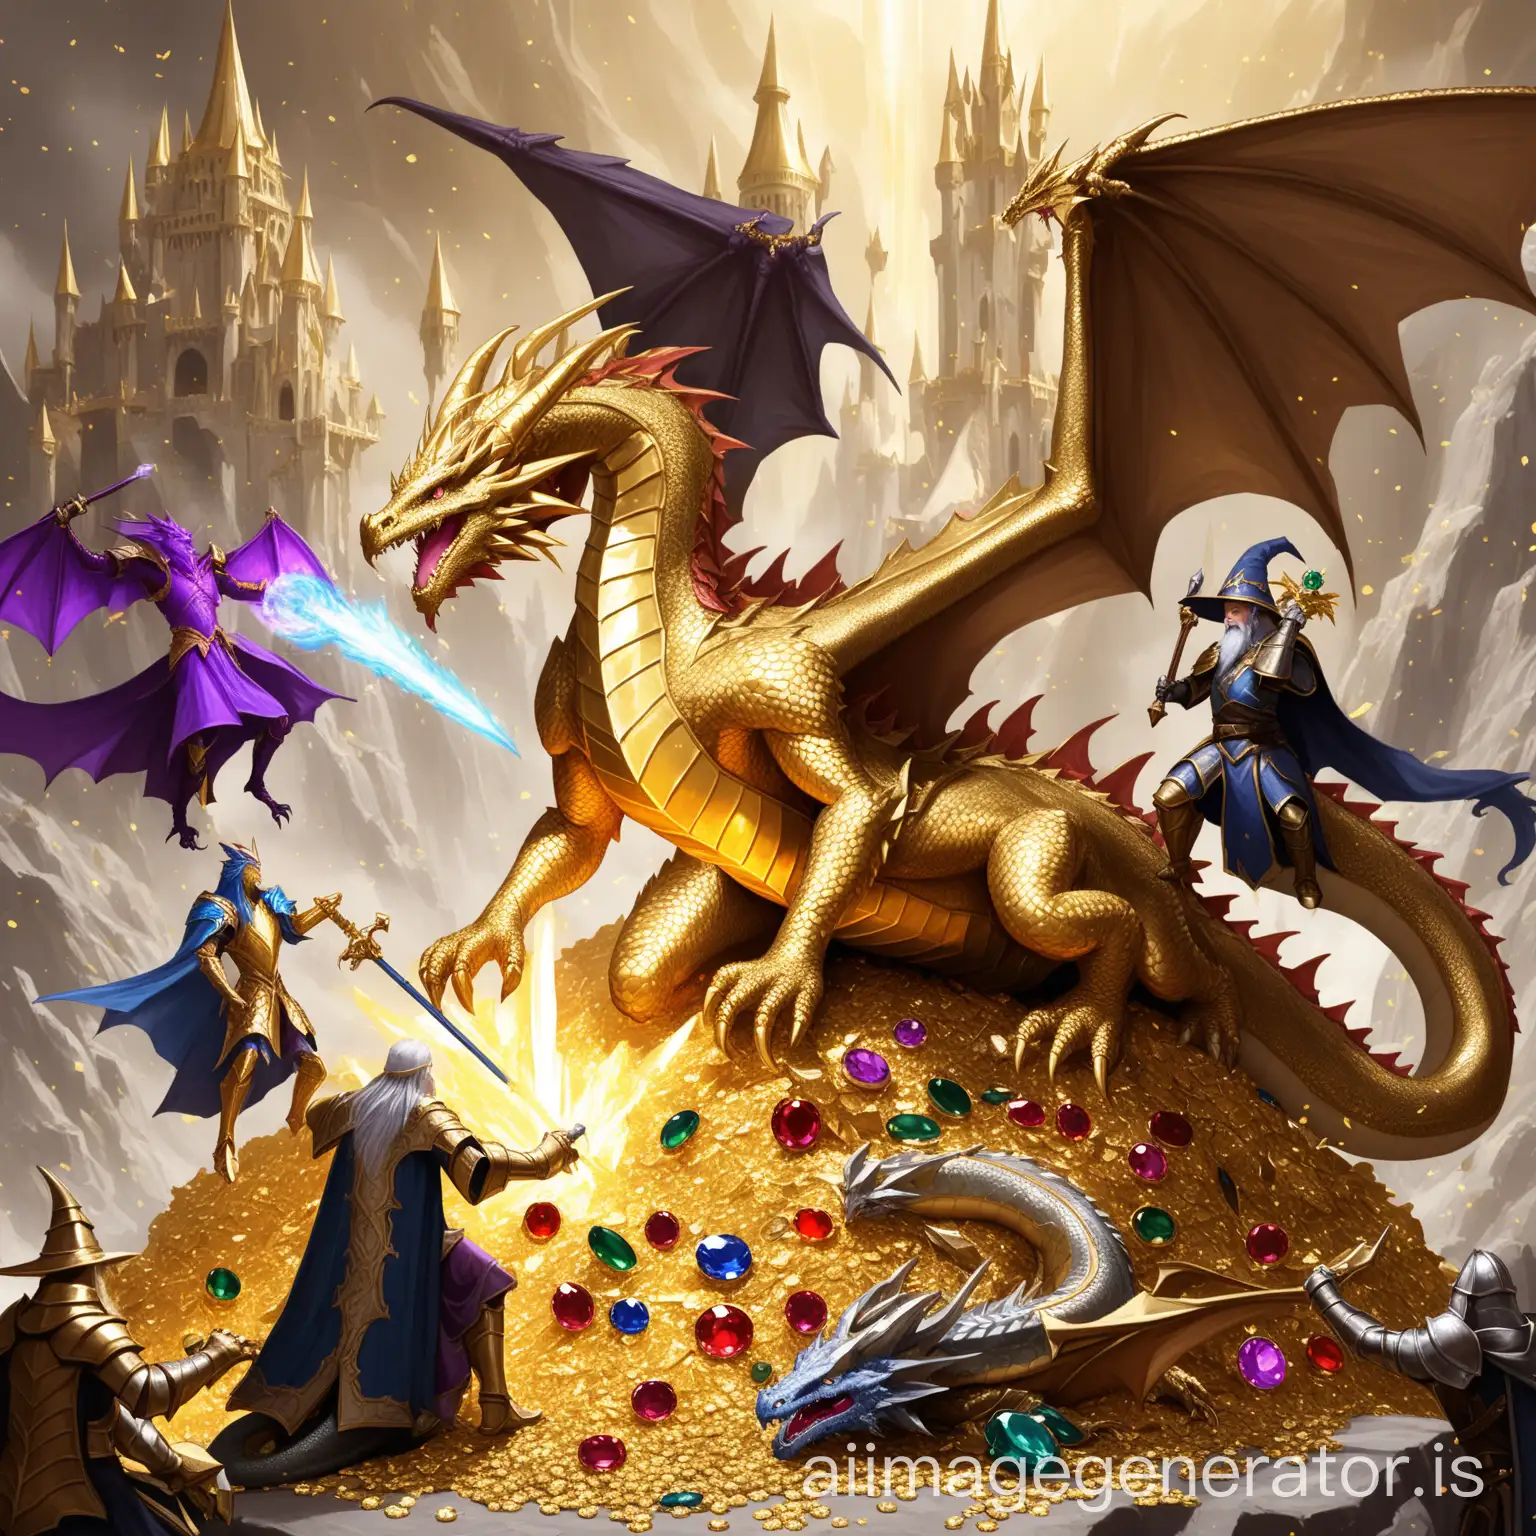 A fantasy dragon sitting on a pile of gold and jewels fighting a wizard and a paladin